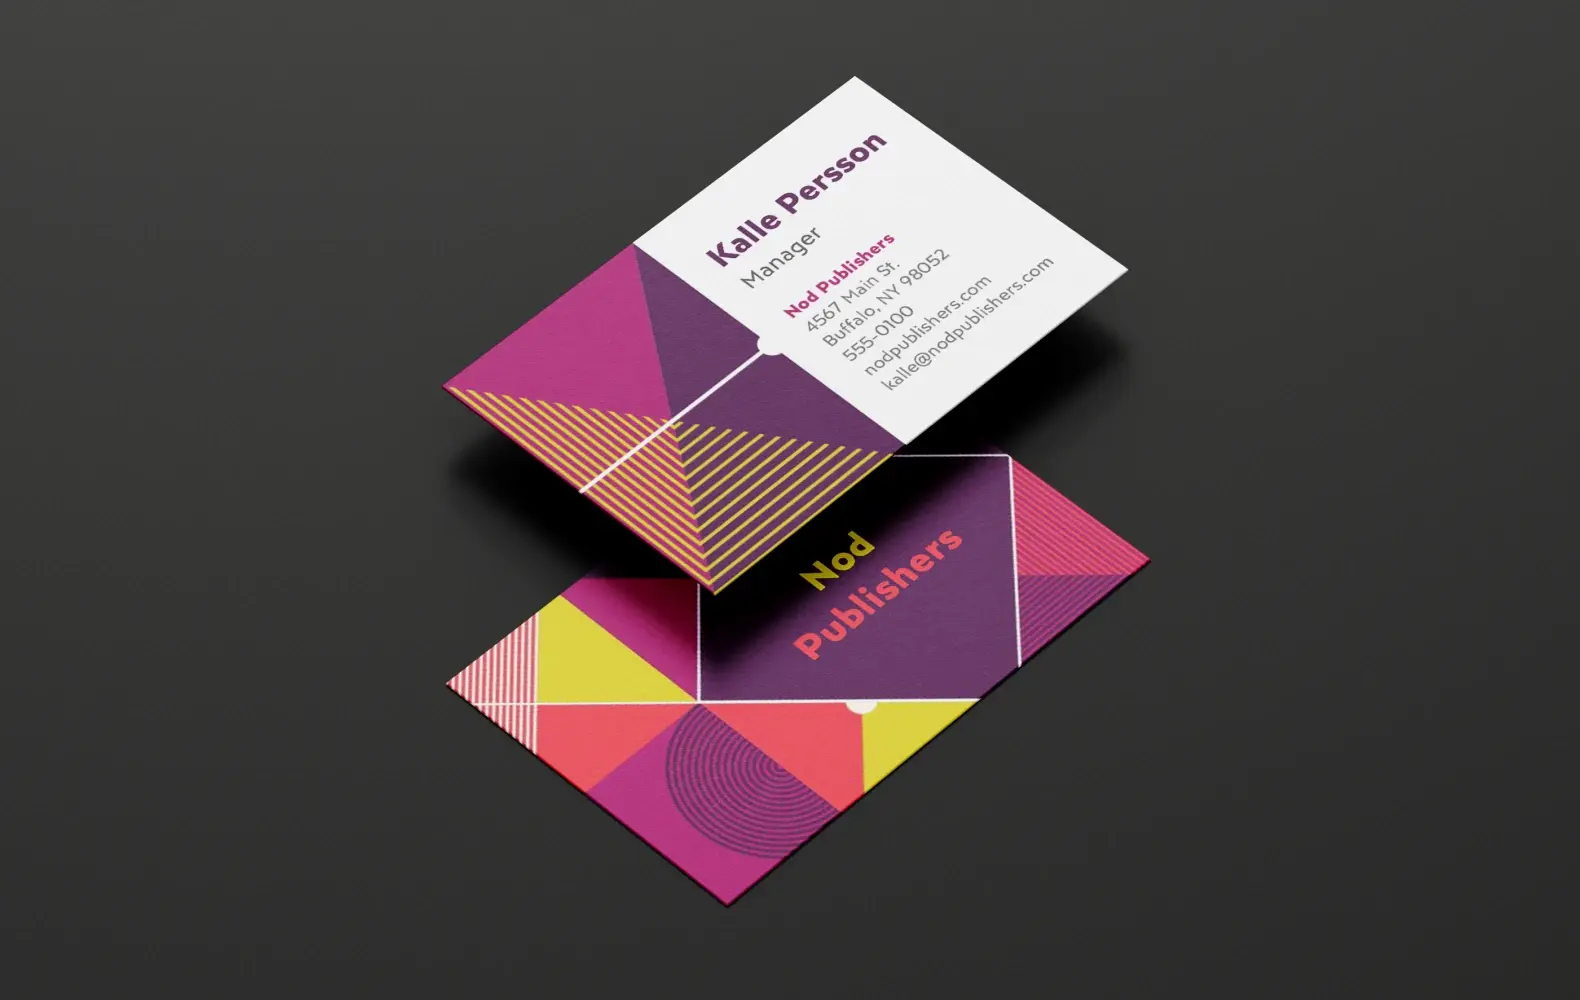 Business card with the business name prominently positioned.